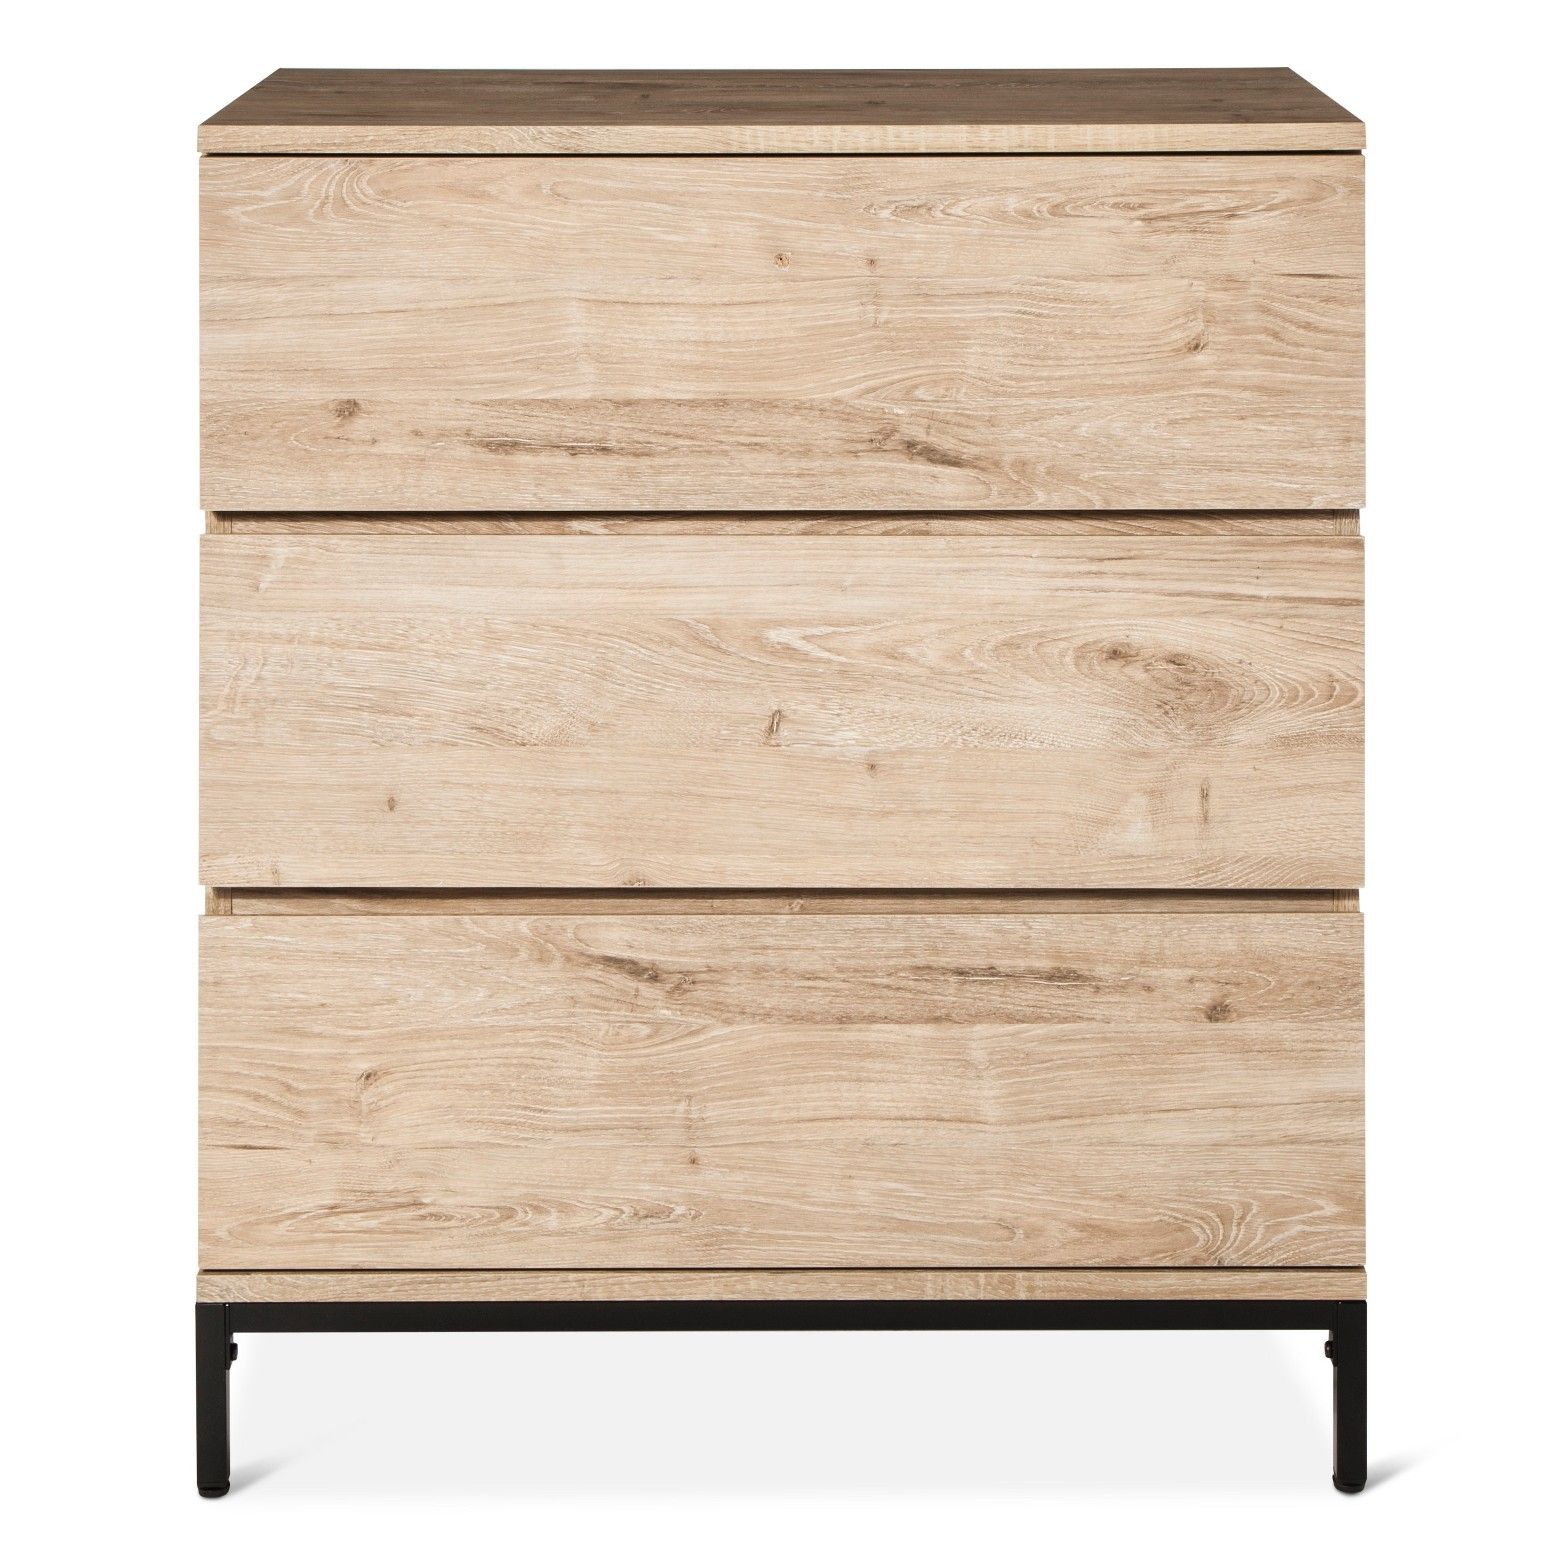 target for dressers amazing styles and finishes accent drawer table any bedroom free shipping purchases over returns tall metal spindle legs marble high top threshold coffee round